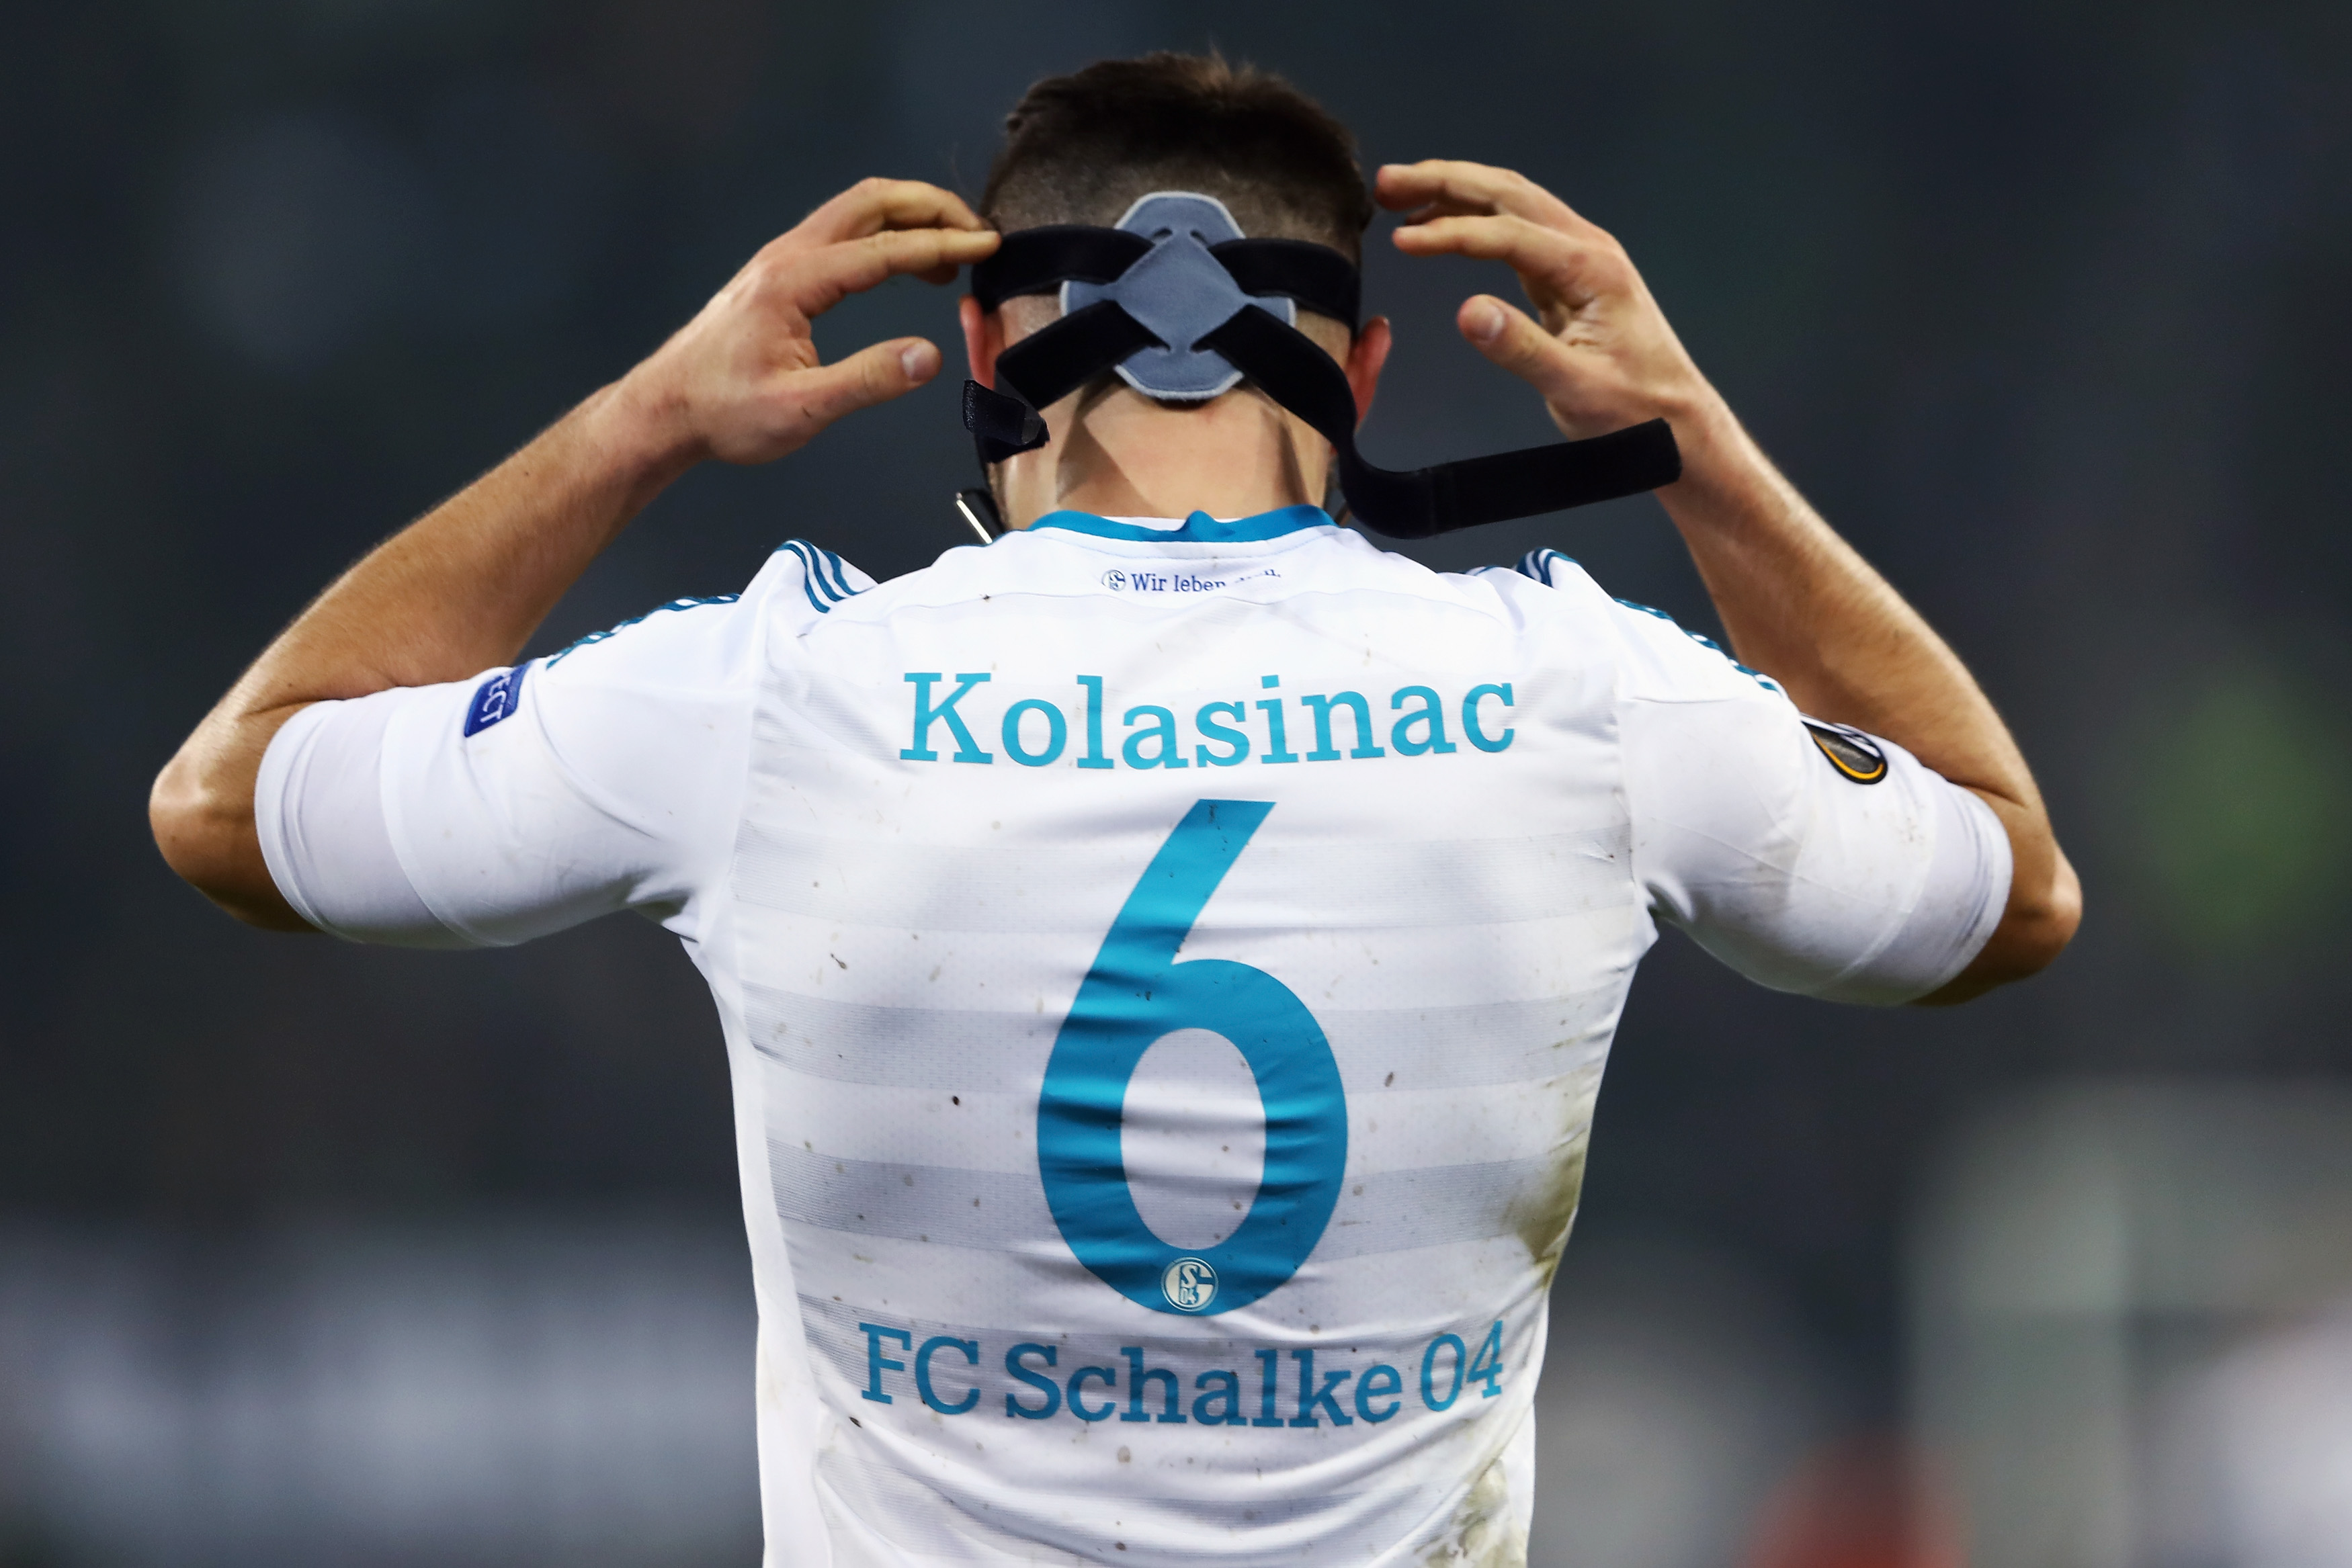 MOENCHENGLADBACH, GERMANY - MARCH 16:  Sead Kolasinac of Schalke reacts after the UEFA Europa  League Round of 16 second leg match between Borussia Moenchengladbach and FC Schalke 04 at Borussia Park Stadium on March 16, 2017 in Moenchengladbach, Germany.  (Photo by Alex Grimm/Bongarts/Getty Images )